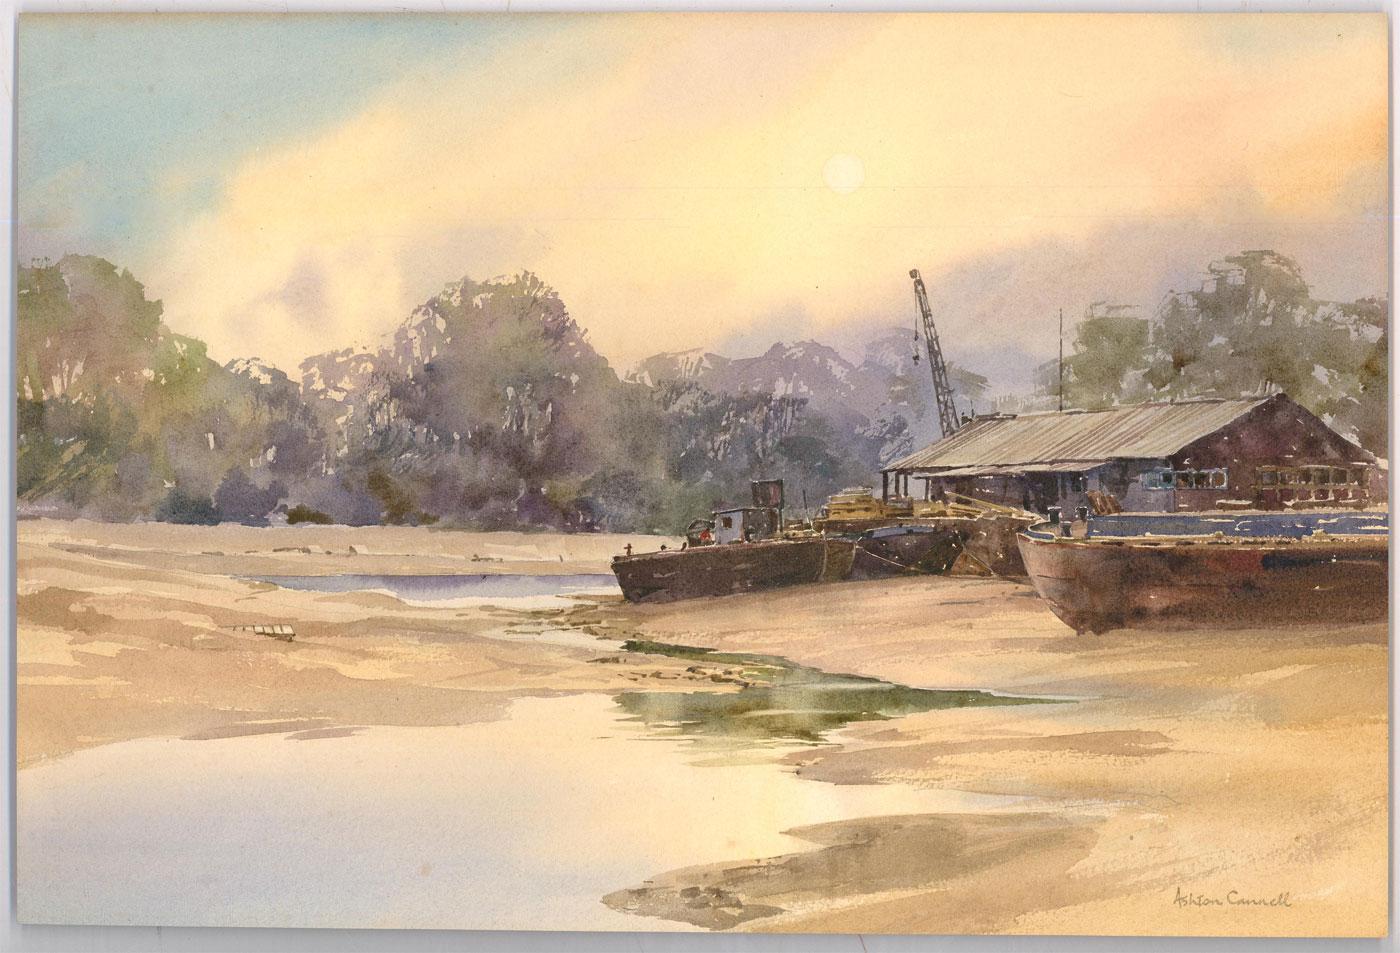 A fine watercolour study of barges at Brentford Creek by 20th century artist Ashton Cannell. Signed to the lower right. On watercolour paper.
